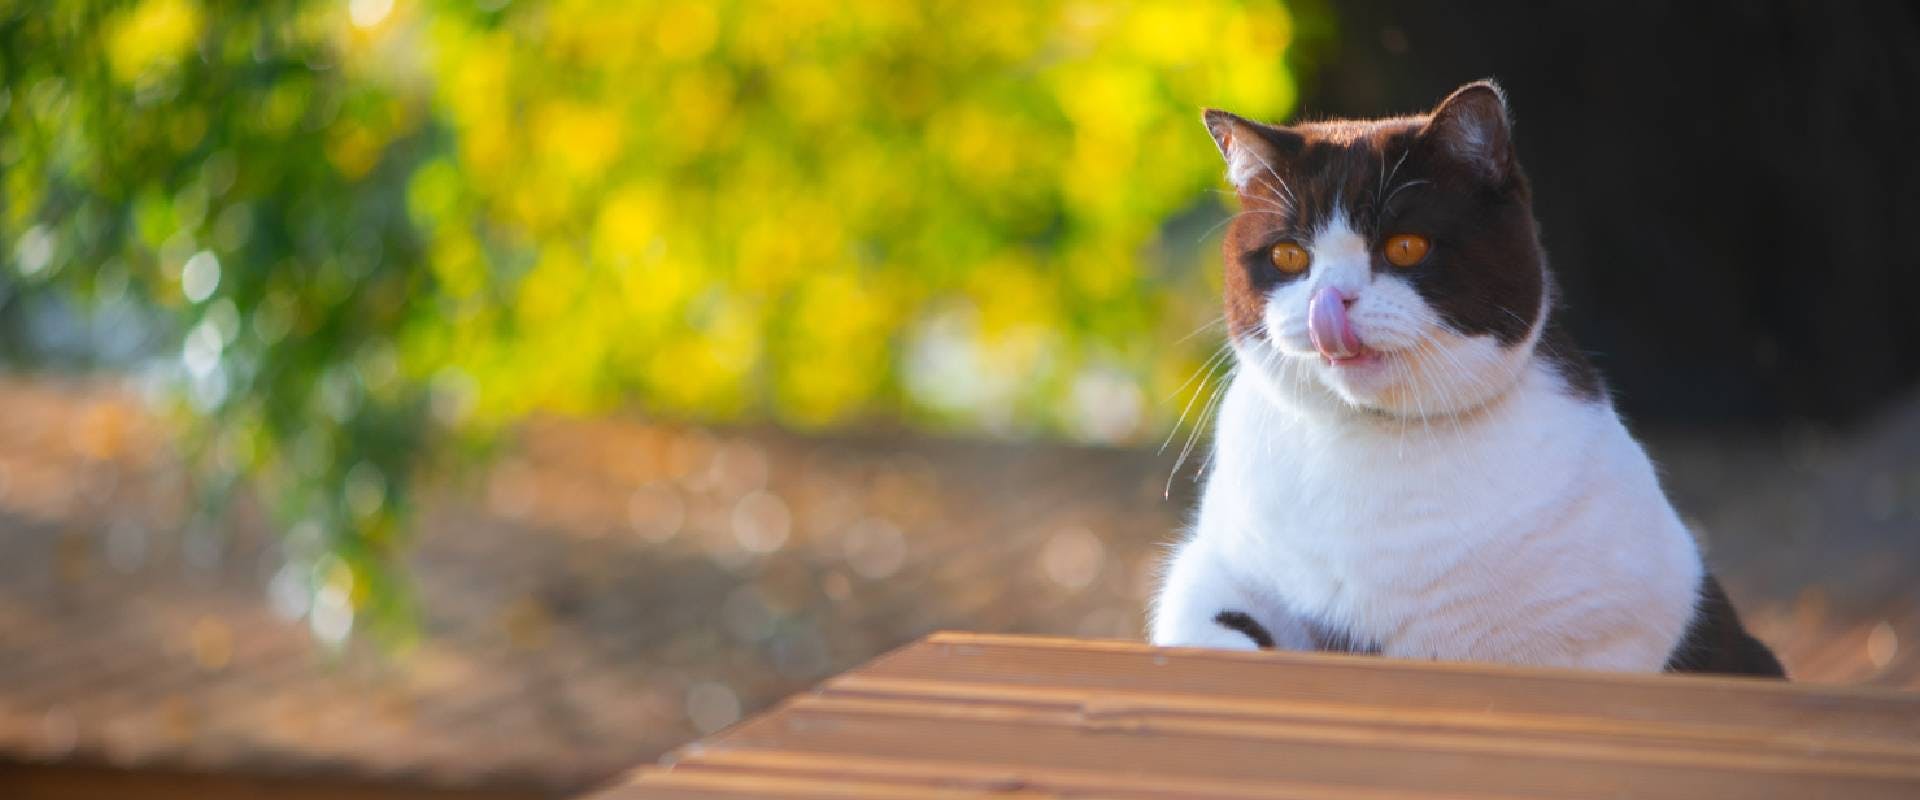 British Shorthair cat with mouth open licking lips while on wooden home terrace